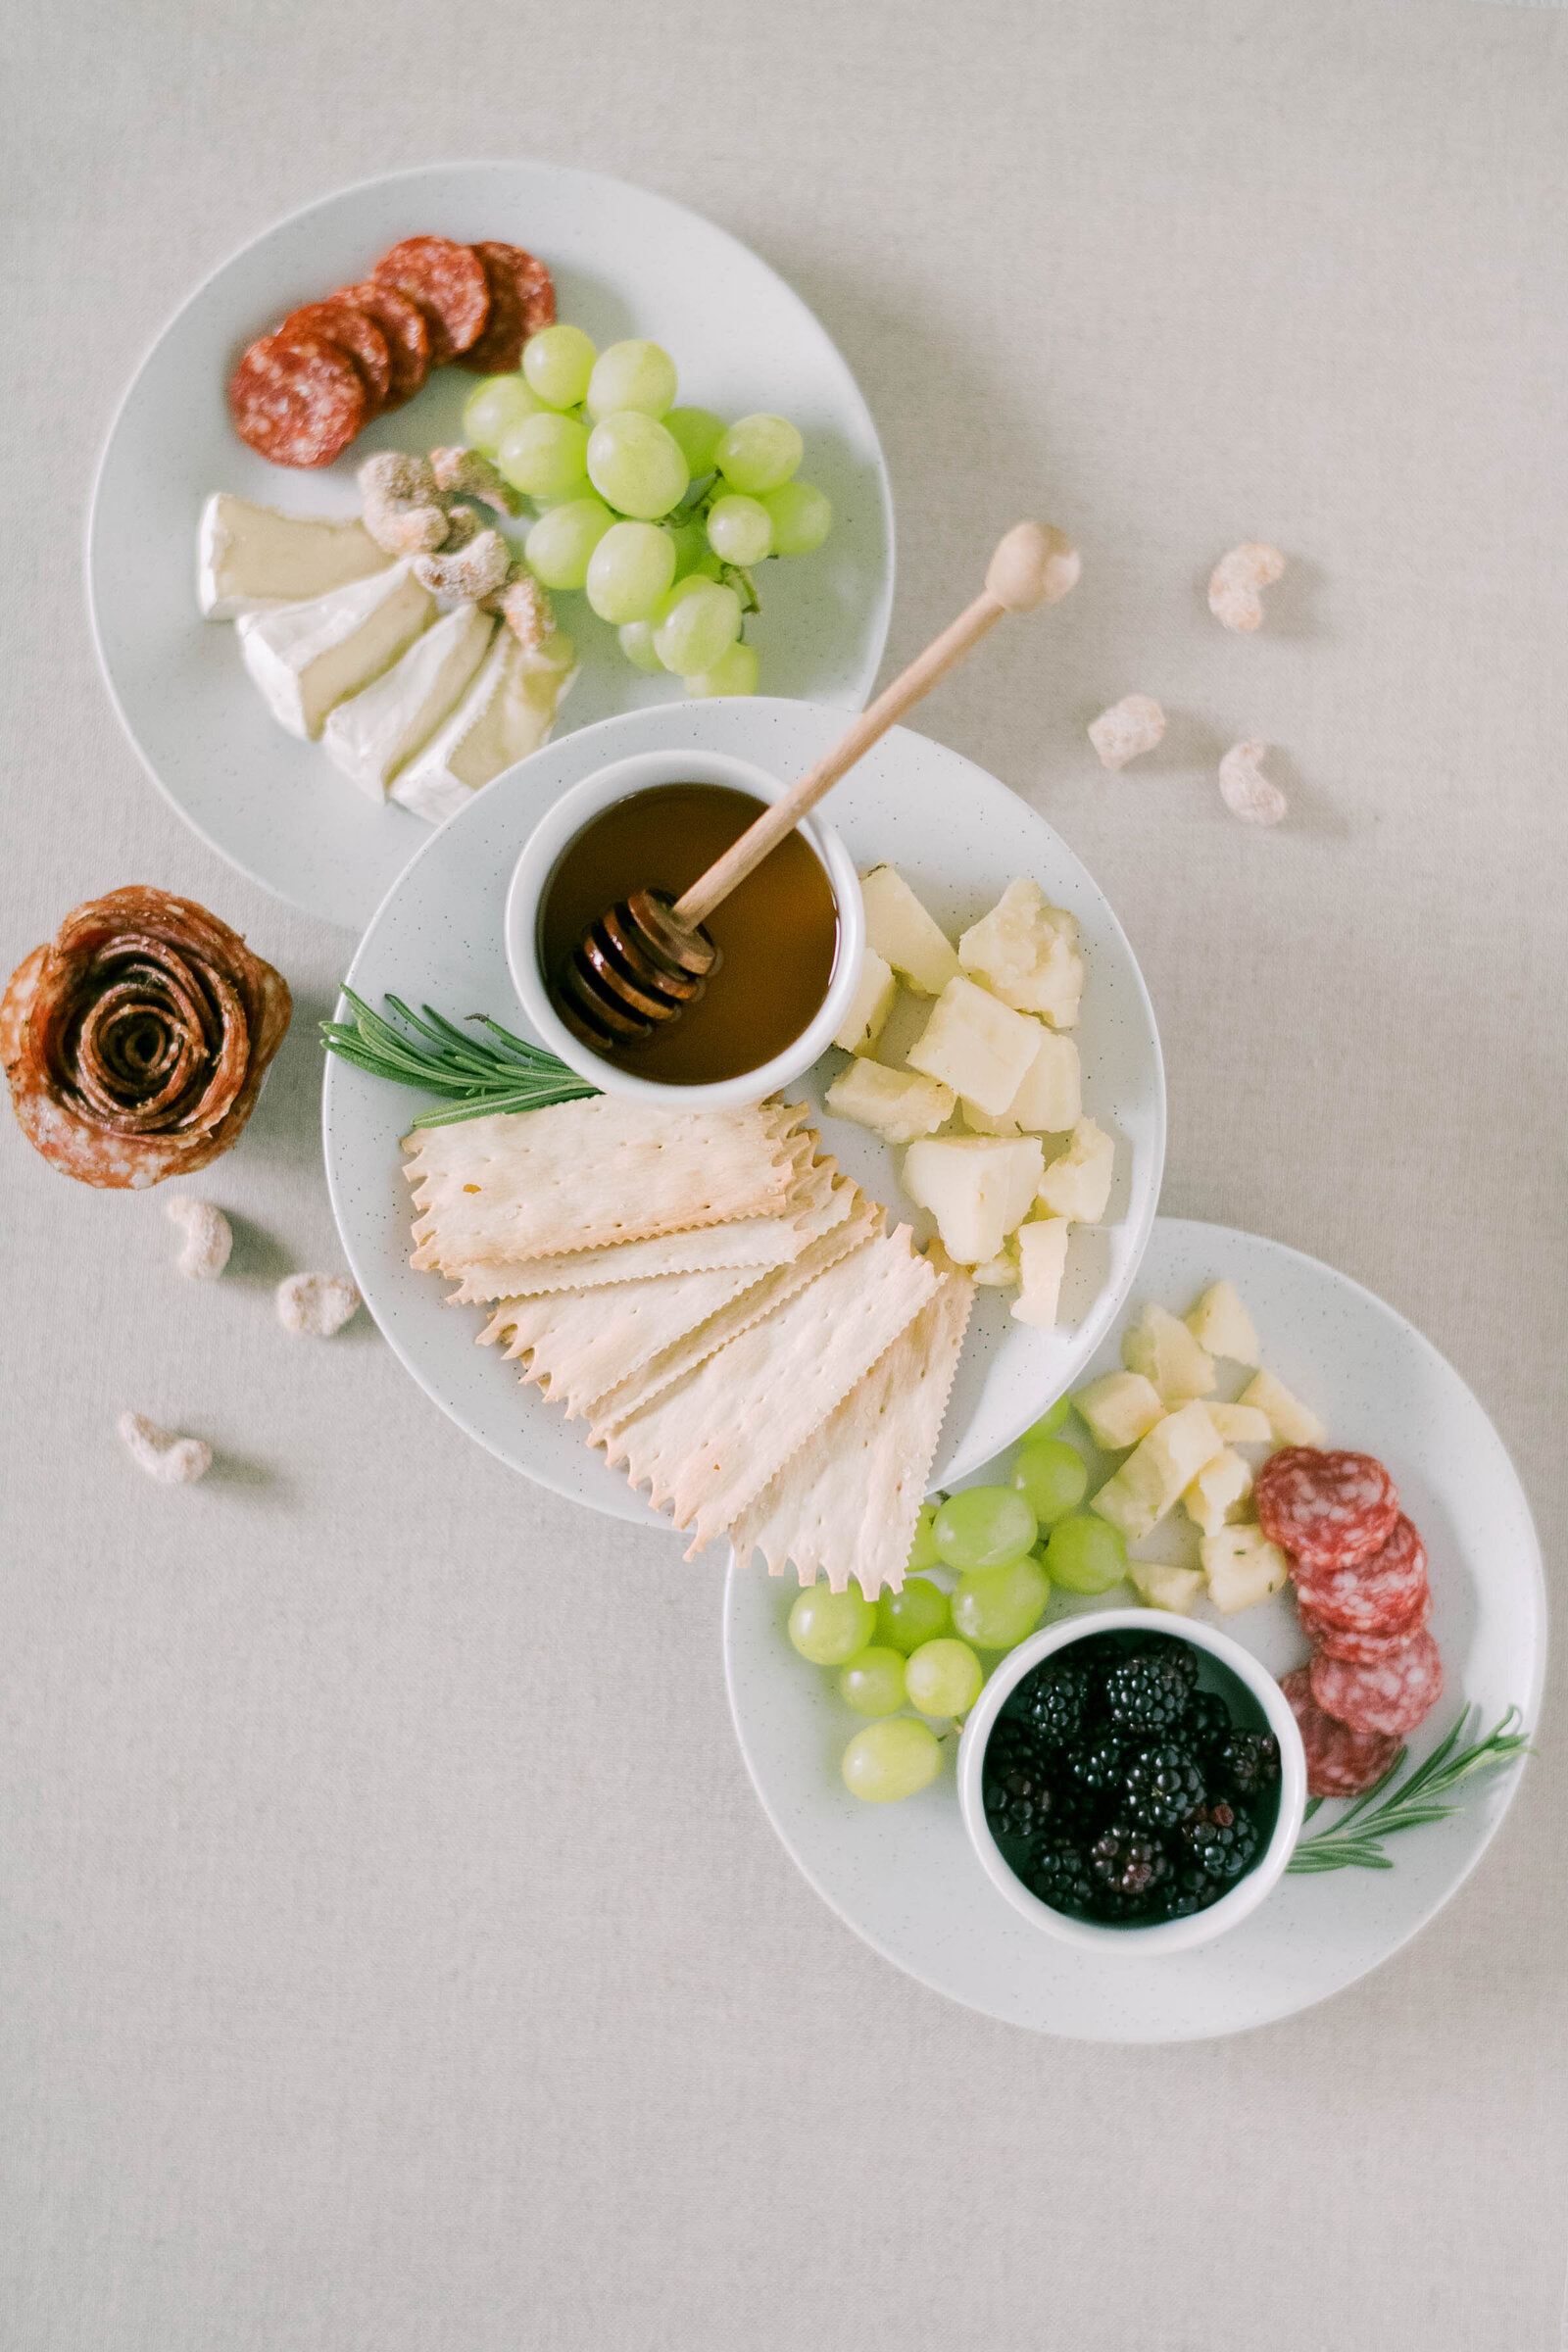 Styled cracker and cheese plates